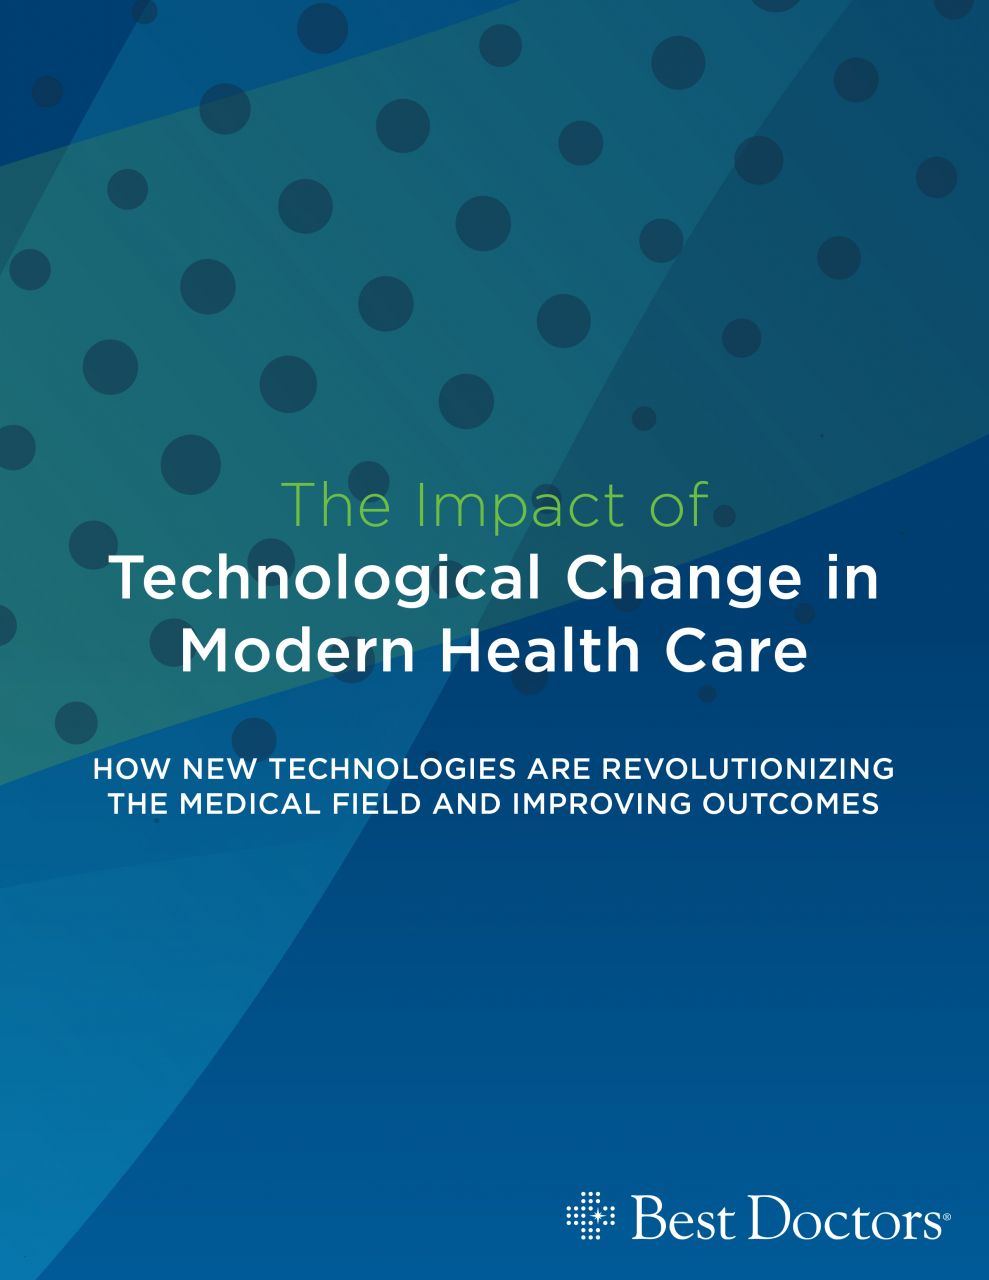 The impact of technological change in modern health care by Stacey Stein